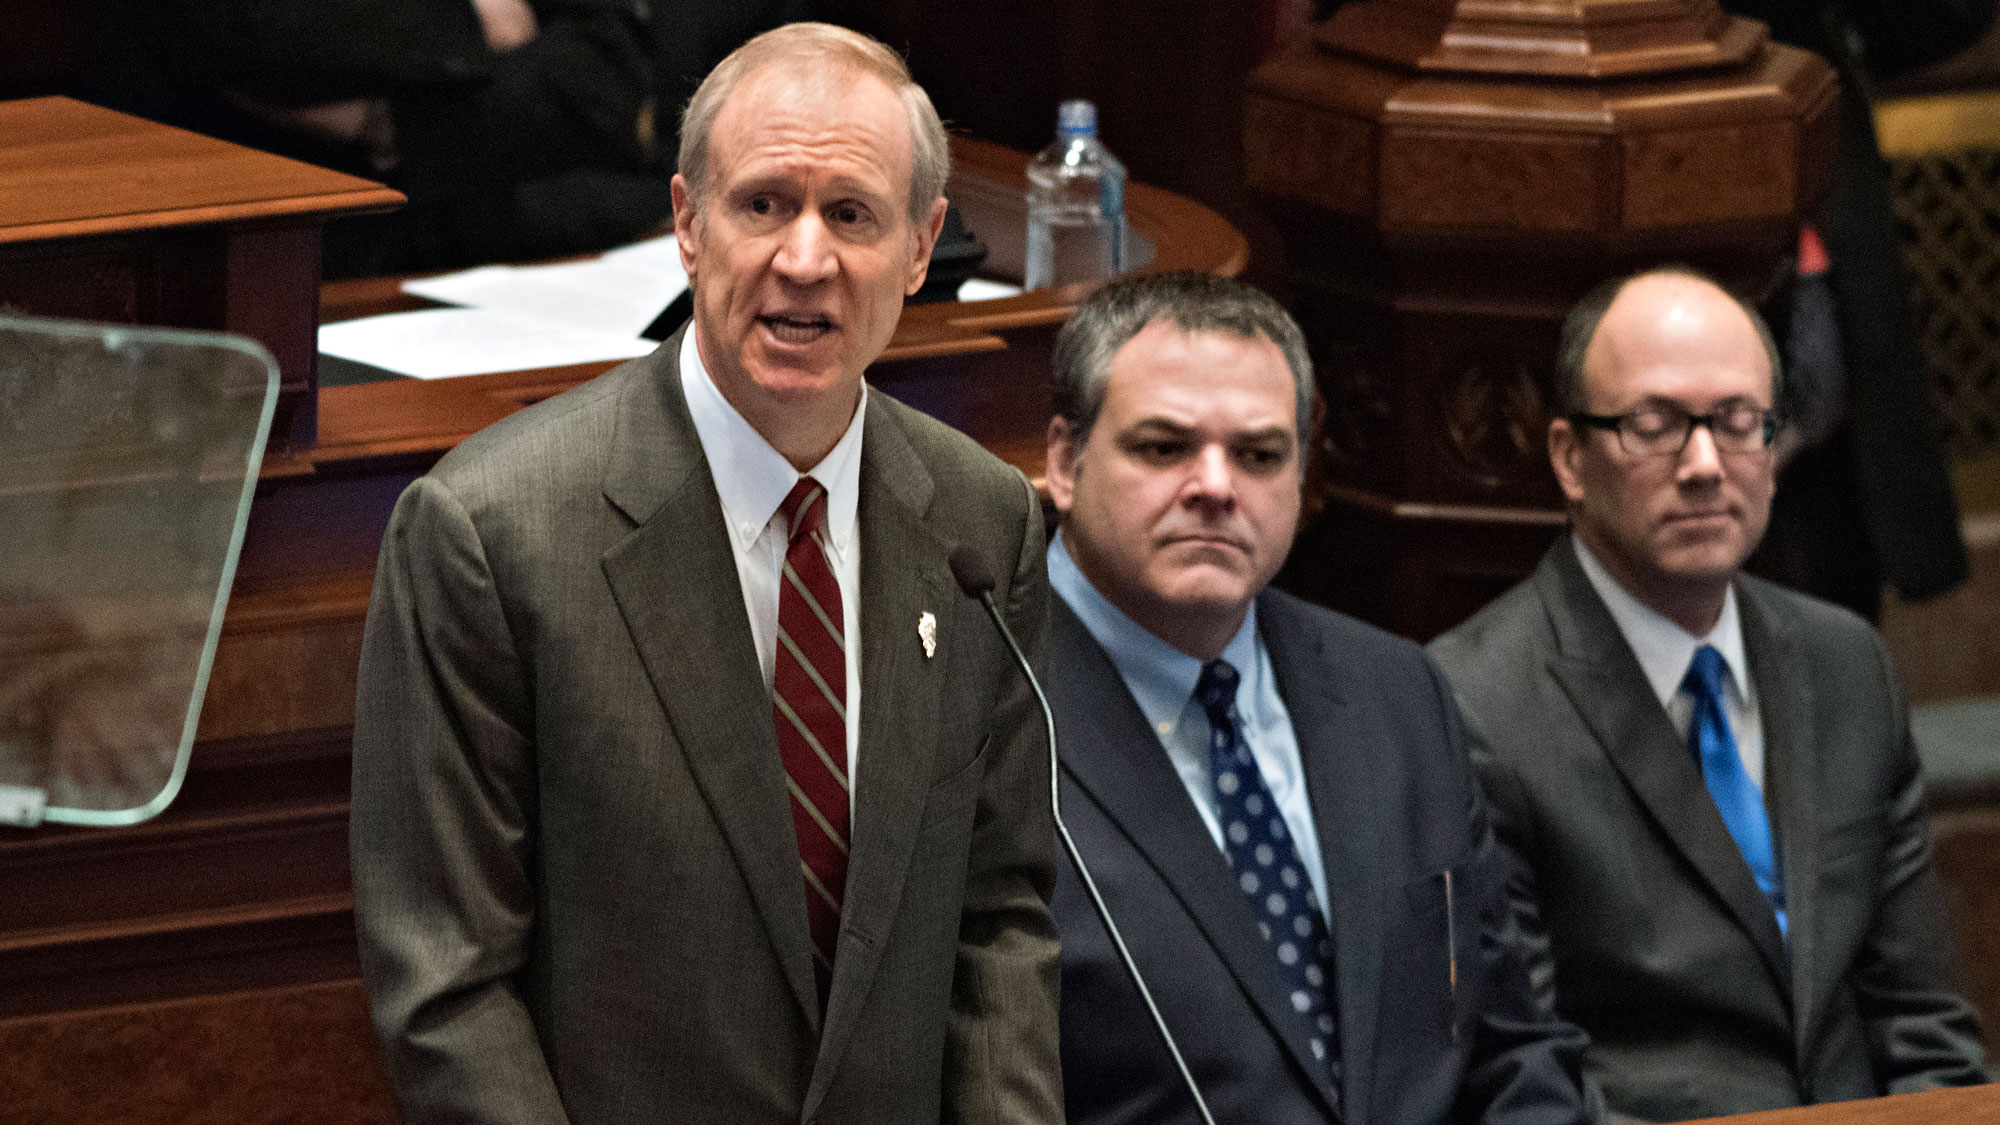 Bruce Rauner, governor of Illinois, left, delivers a budget address in the House Chamber of the State Capitol building in Springfield, Illinois, U.S., on Wednesday, Feb. 18, 2015.
